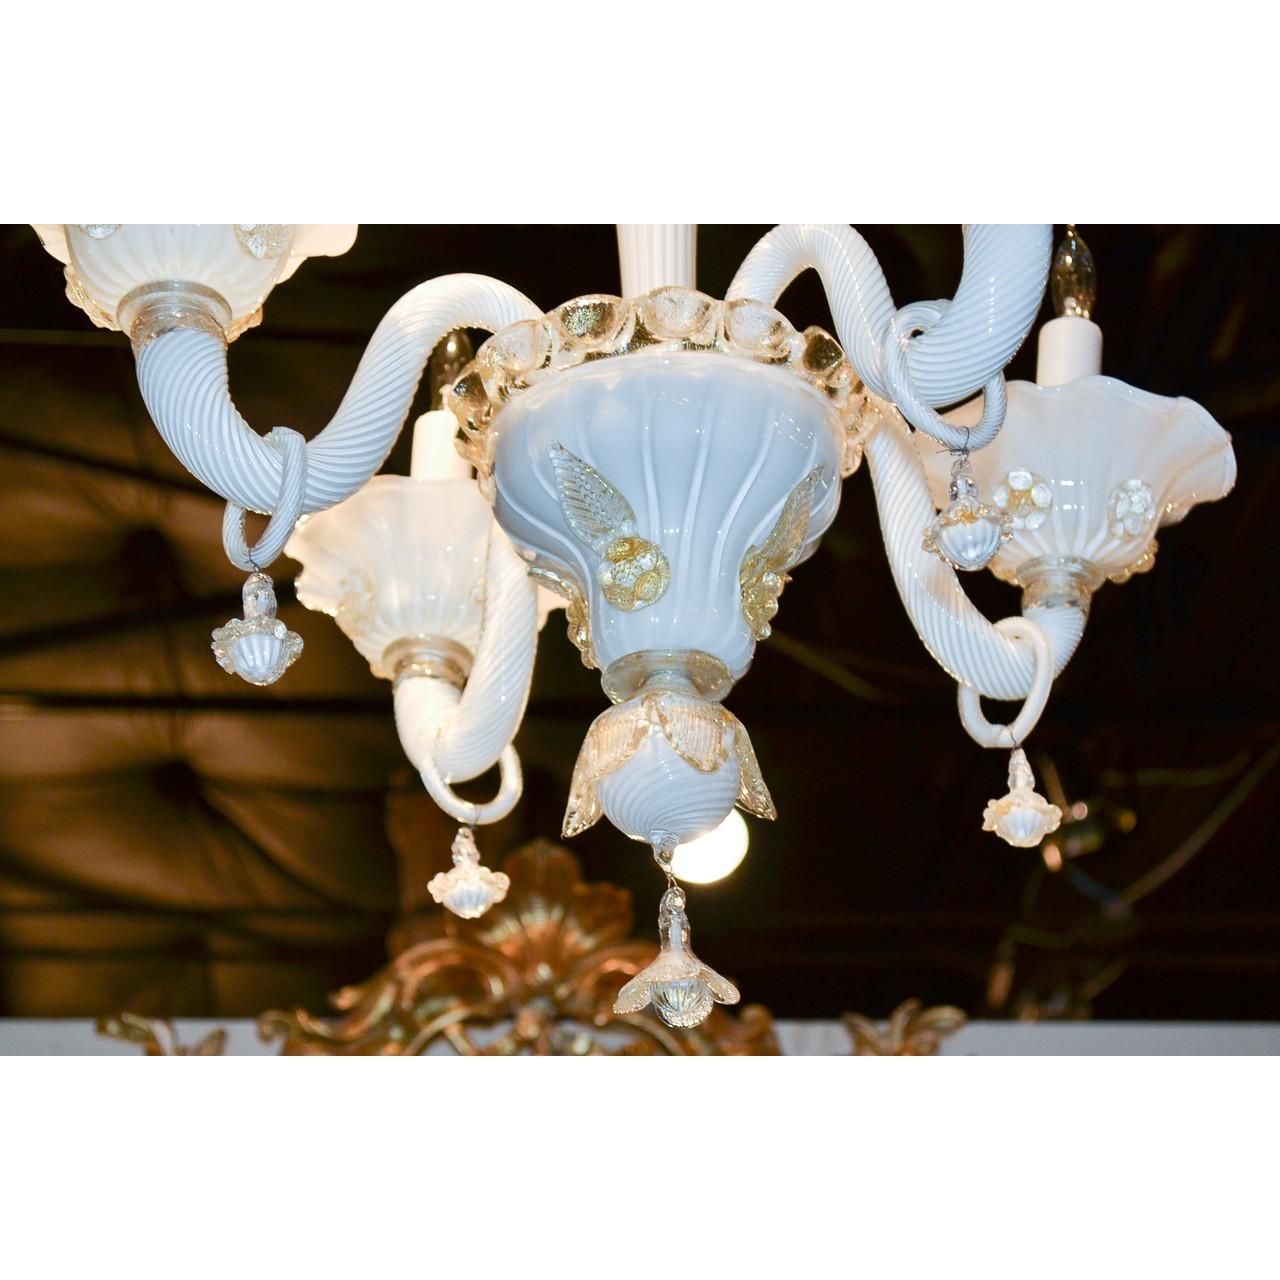 Lovely antique Venetian opalescent glass chandelier in wonderful hues of blue, pale pink, and hints of amber. The bulbous and tapered stem decorated with glass flower heads in relief. Mounted with four swirl-pattern scrolled arms with ring pendants